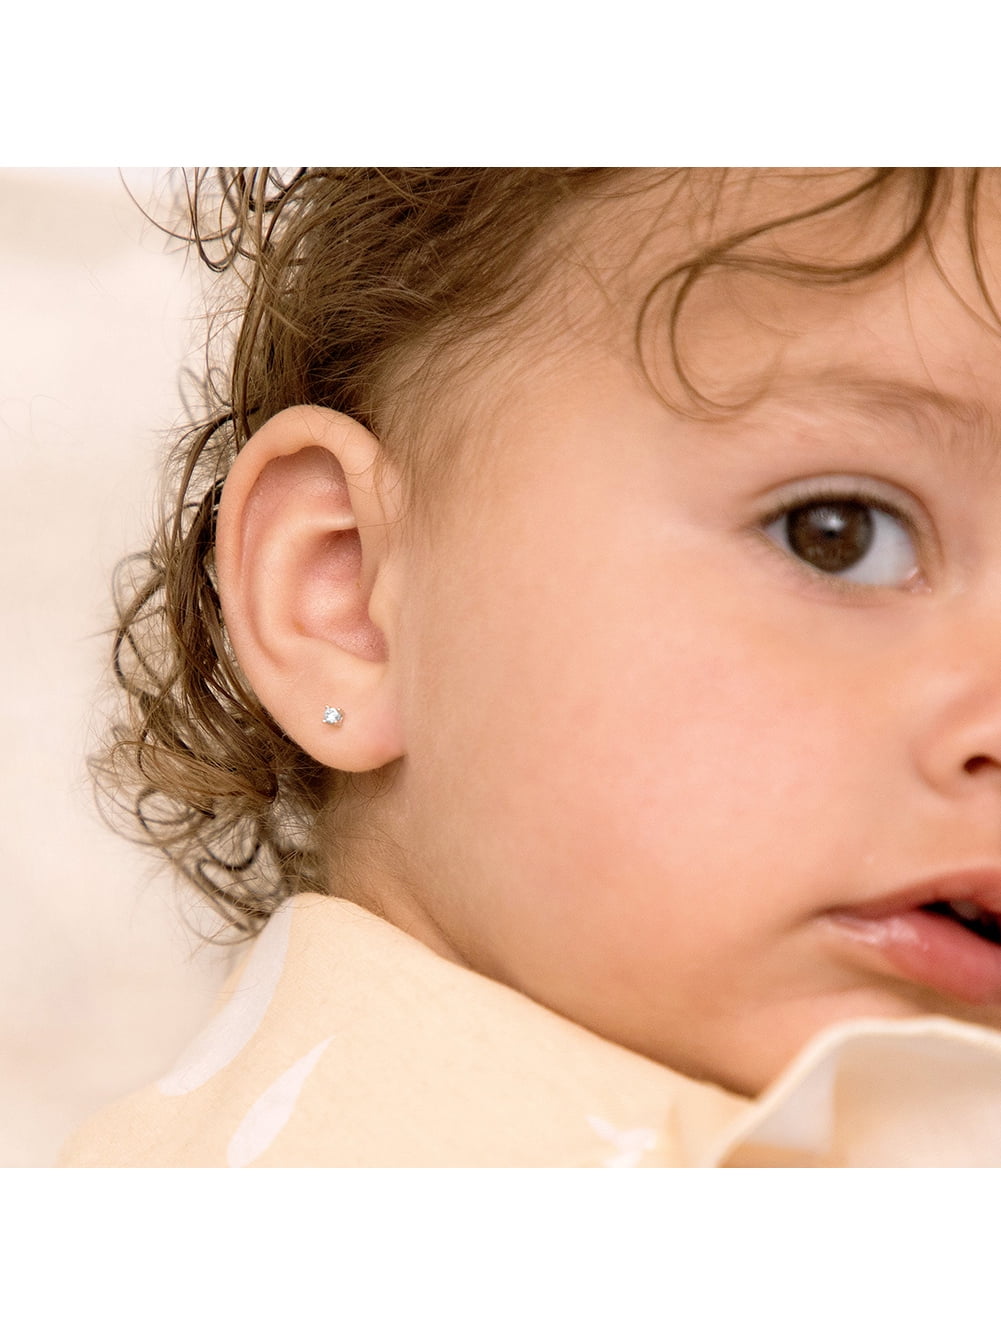 Baby Girl Golden Earrings: The perfect accessories | Dishis Jewels